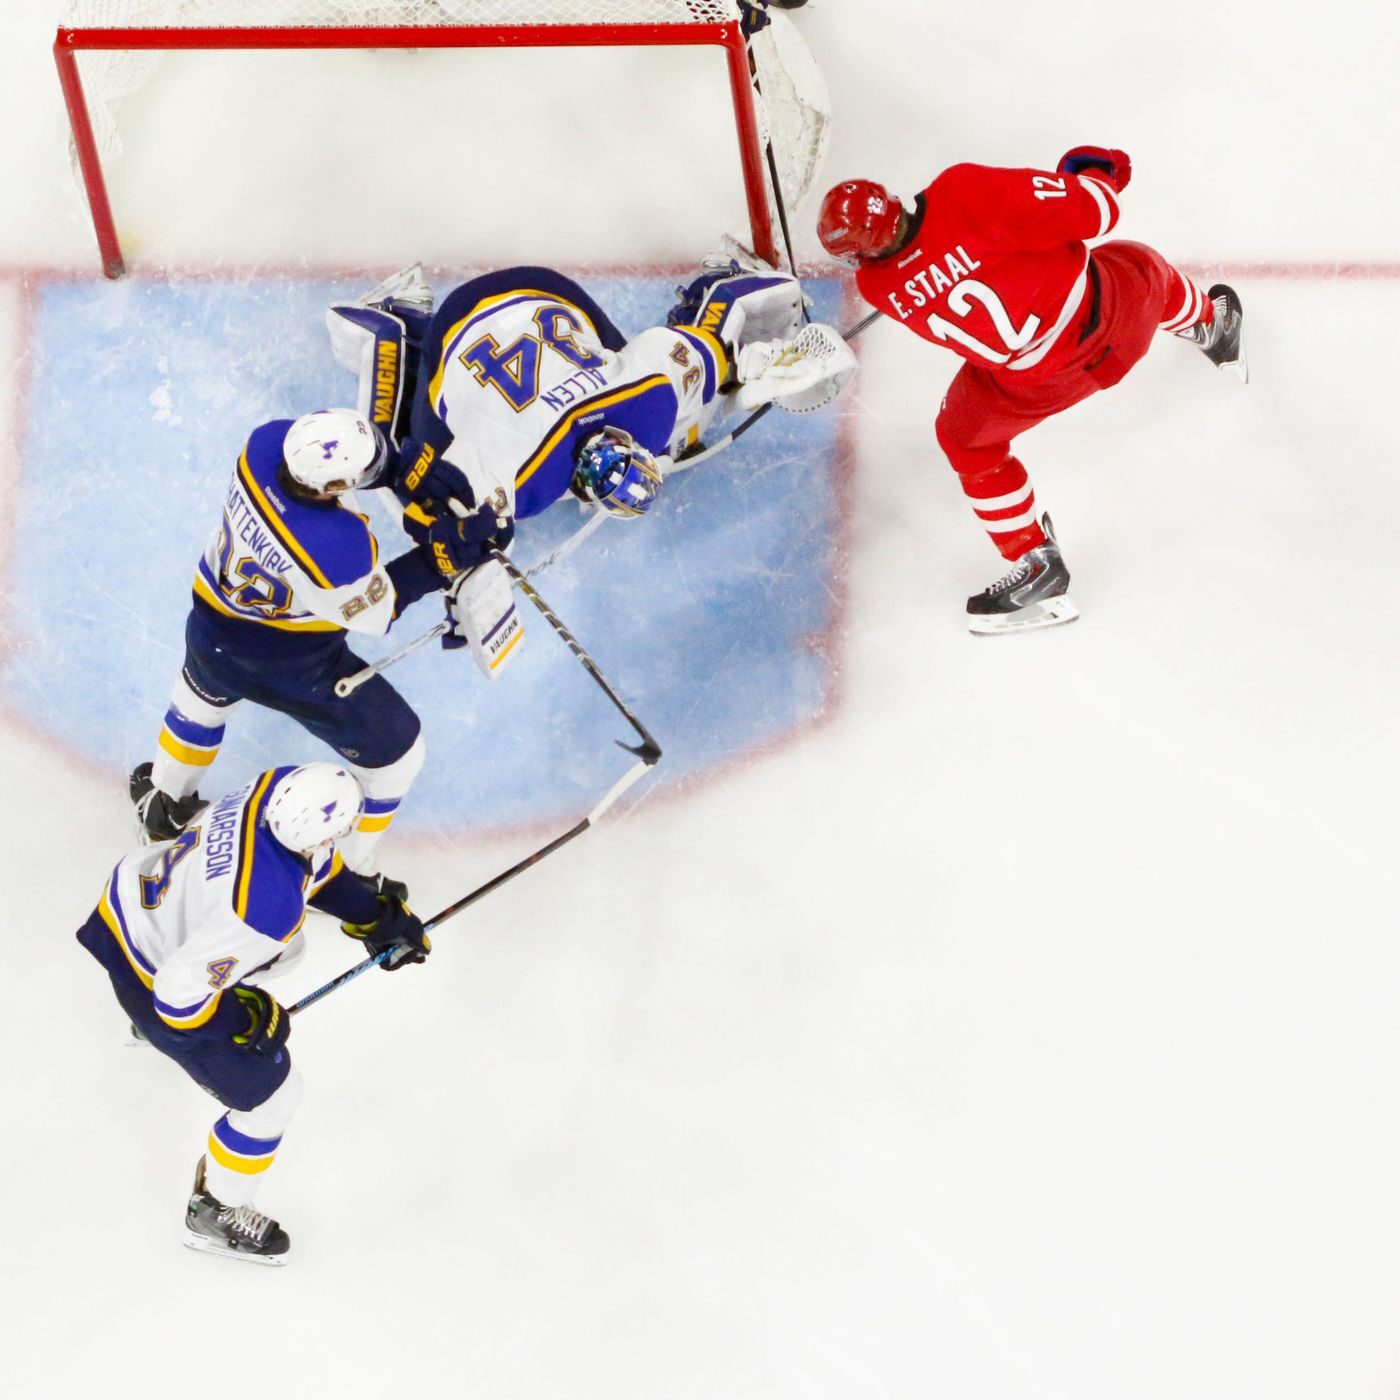 Watch Carolina Hurricanes vs St. Louis Blues Live NHL Game Online info, TV Channel, Wednesday,22 February 2023